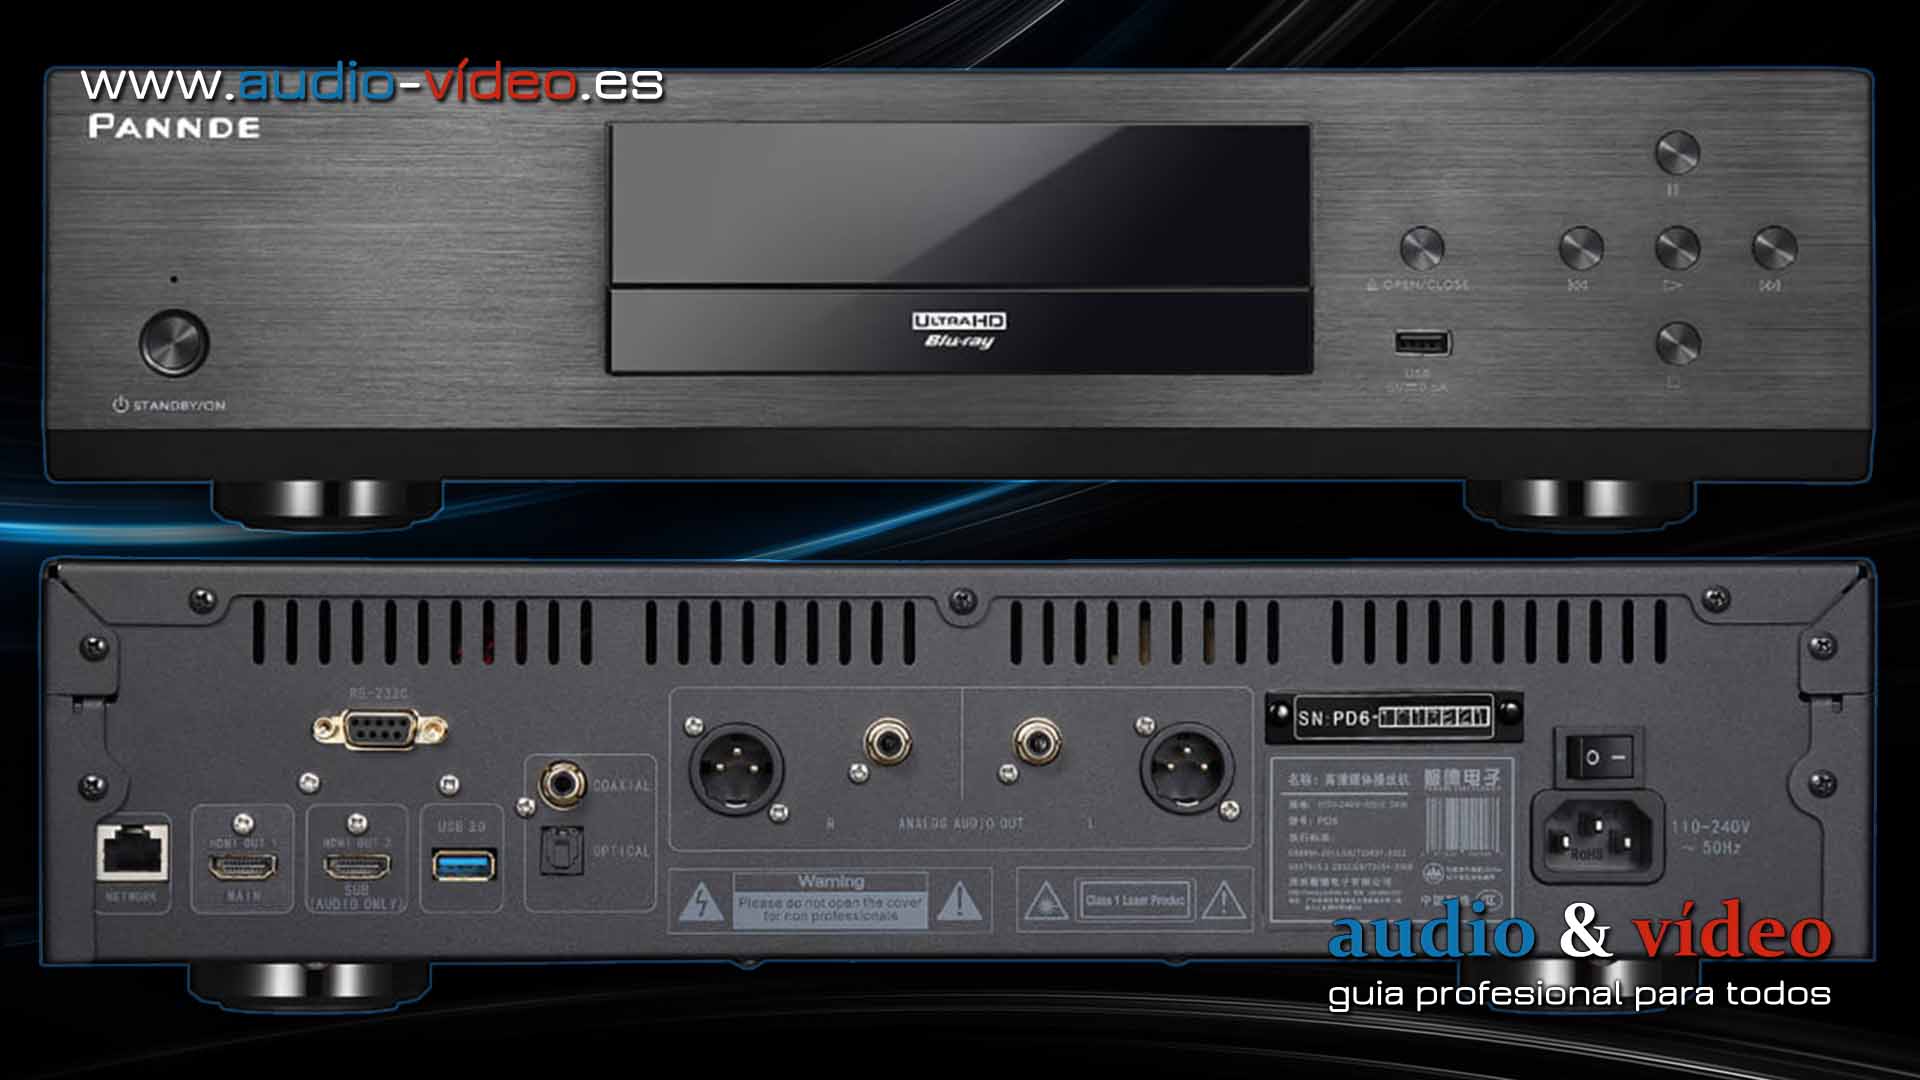 https://www.audio-video.es/wp-content/uploads/2021/11/Pannde-PD-6-reproductor-Blu-ray-UHD-HighEnd-dispositivo.jpg